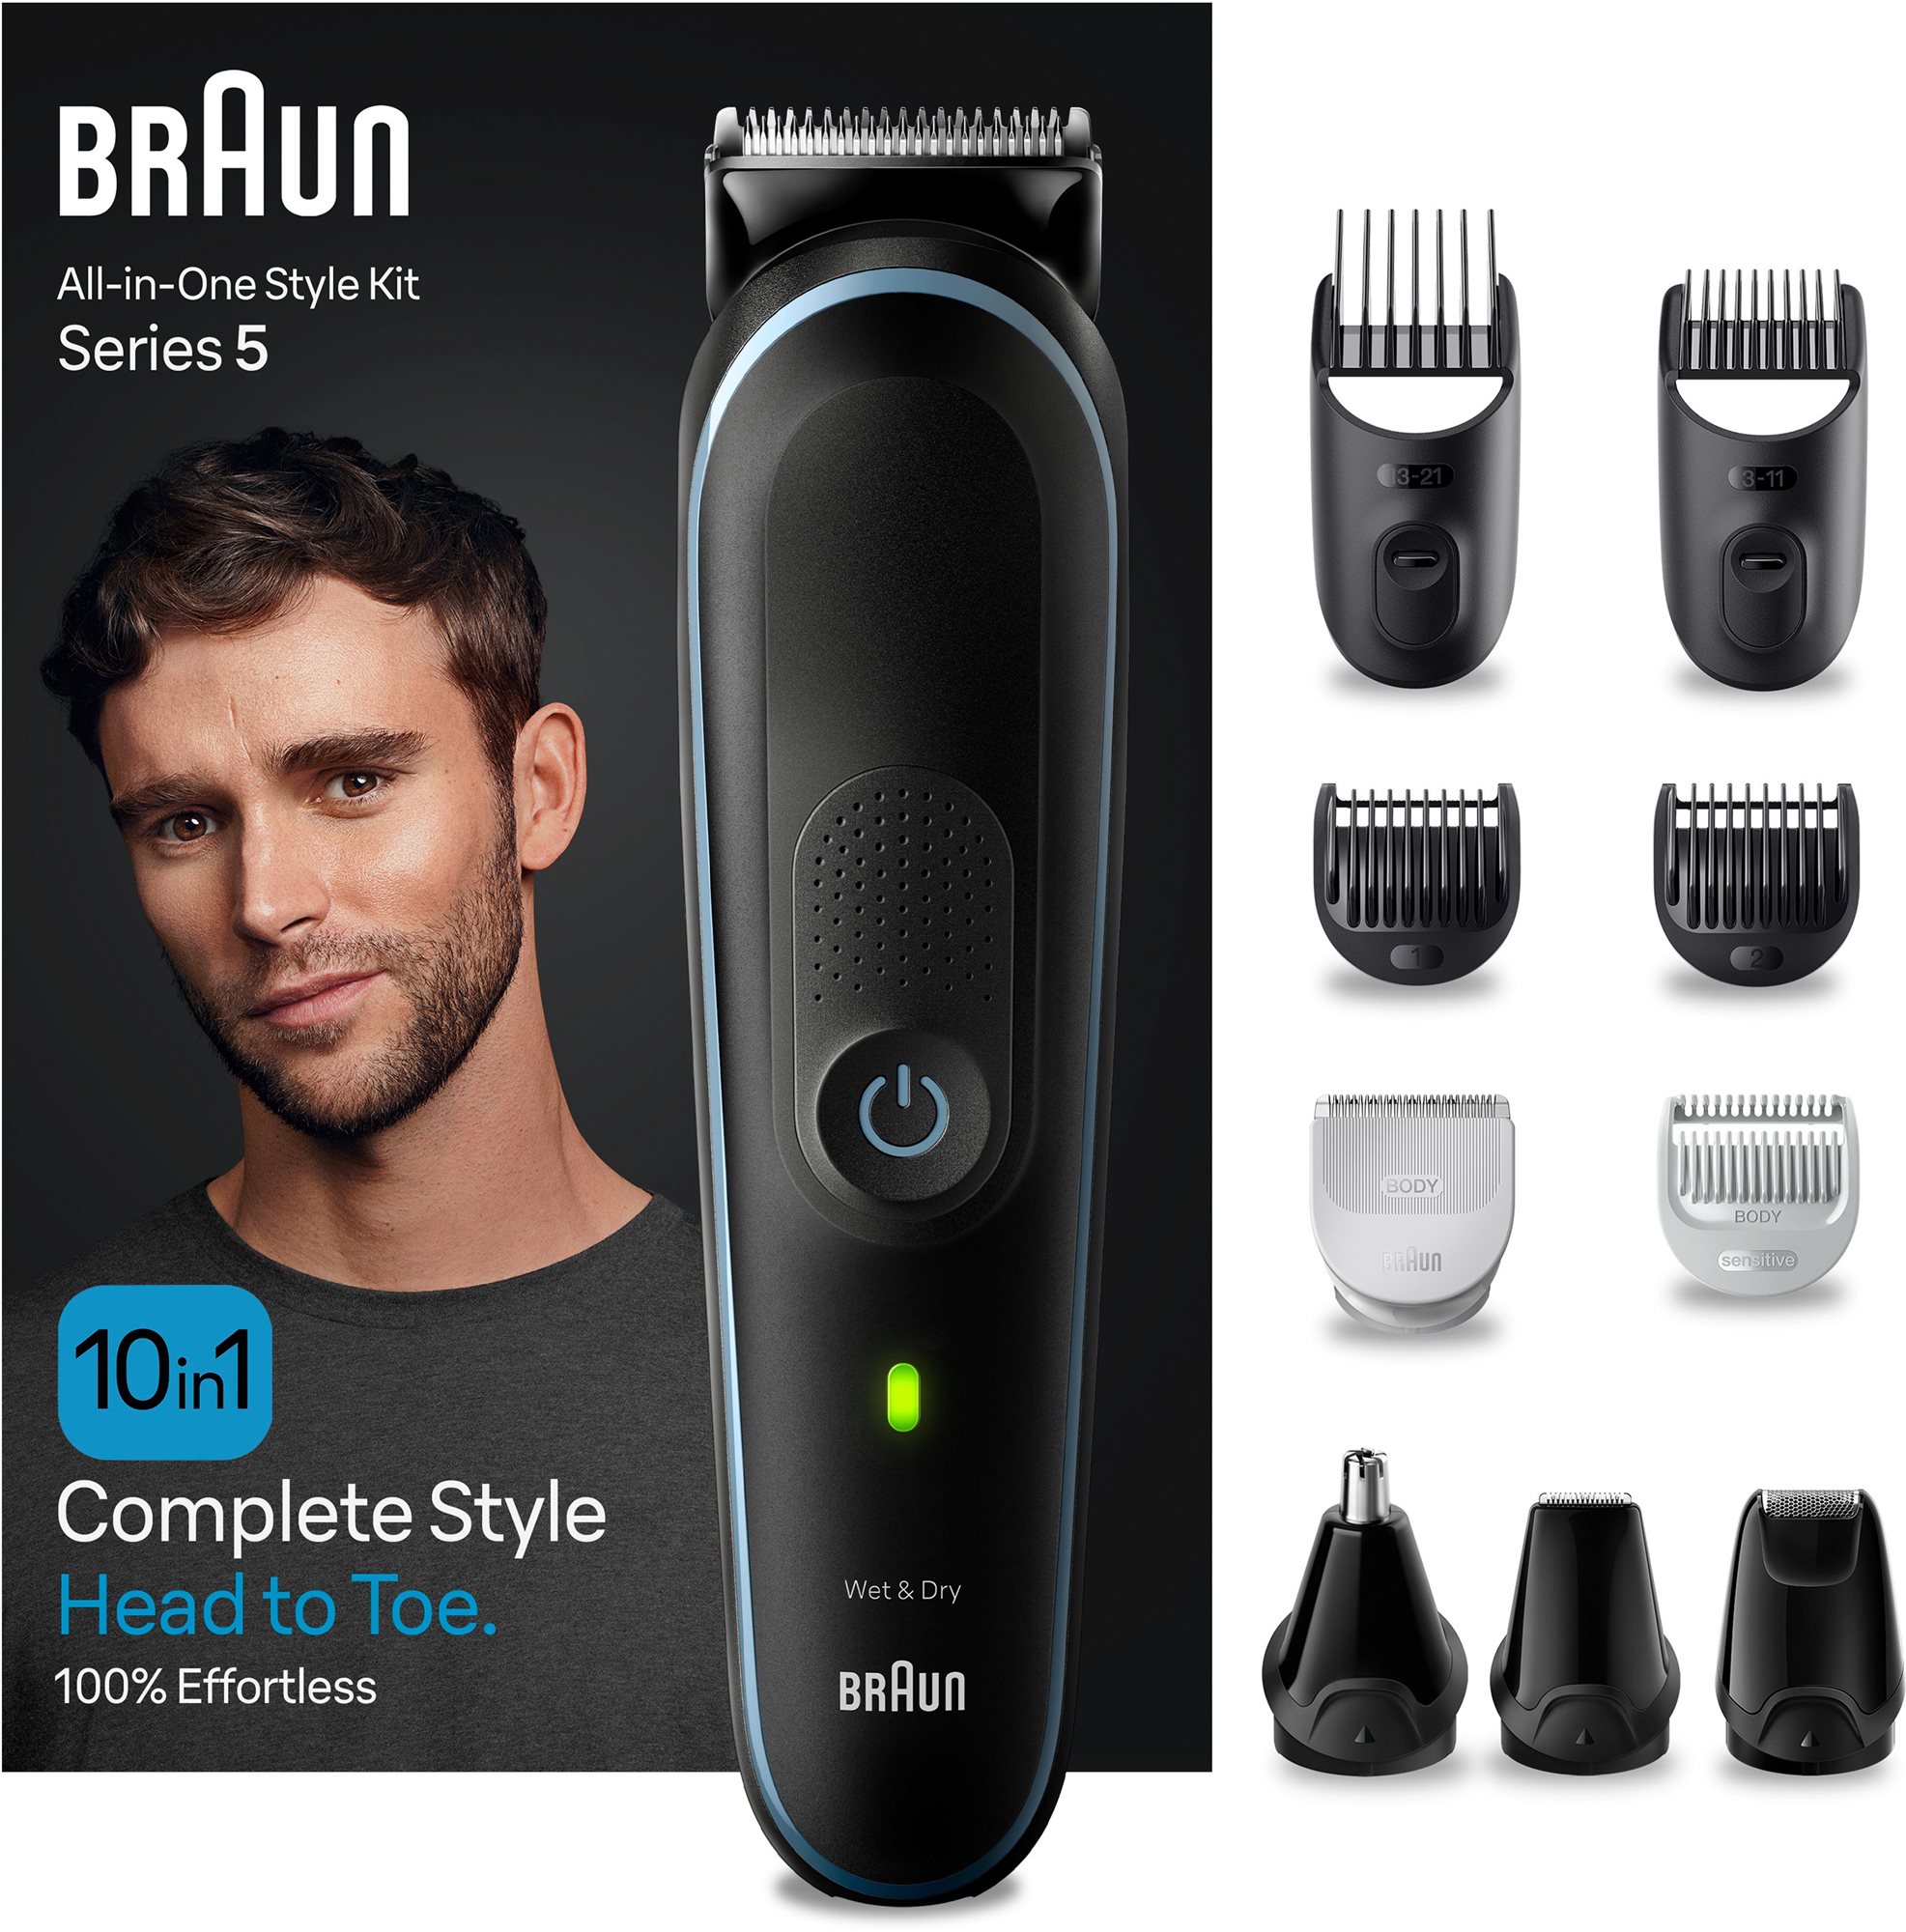 Braun All-In-One Series 5 MGK5445, 10in1